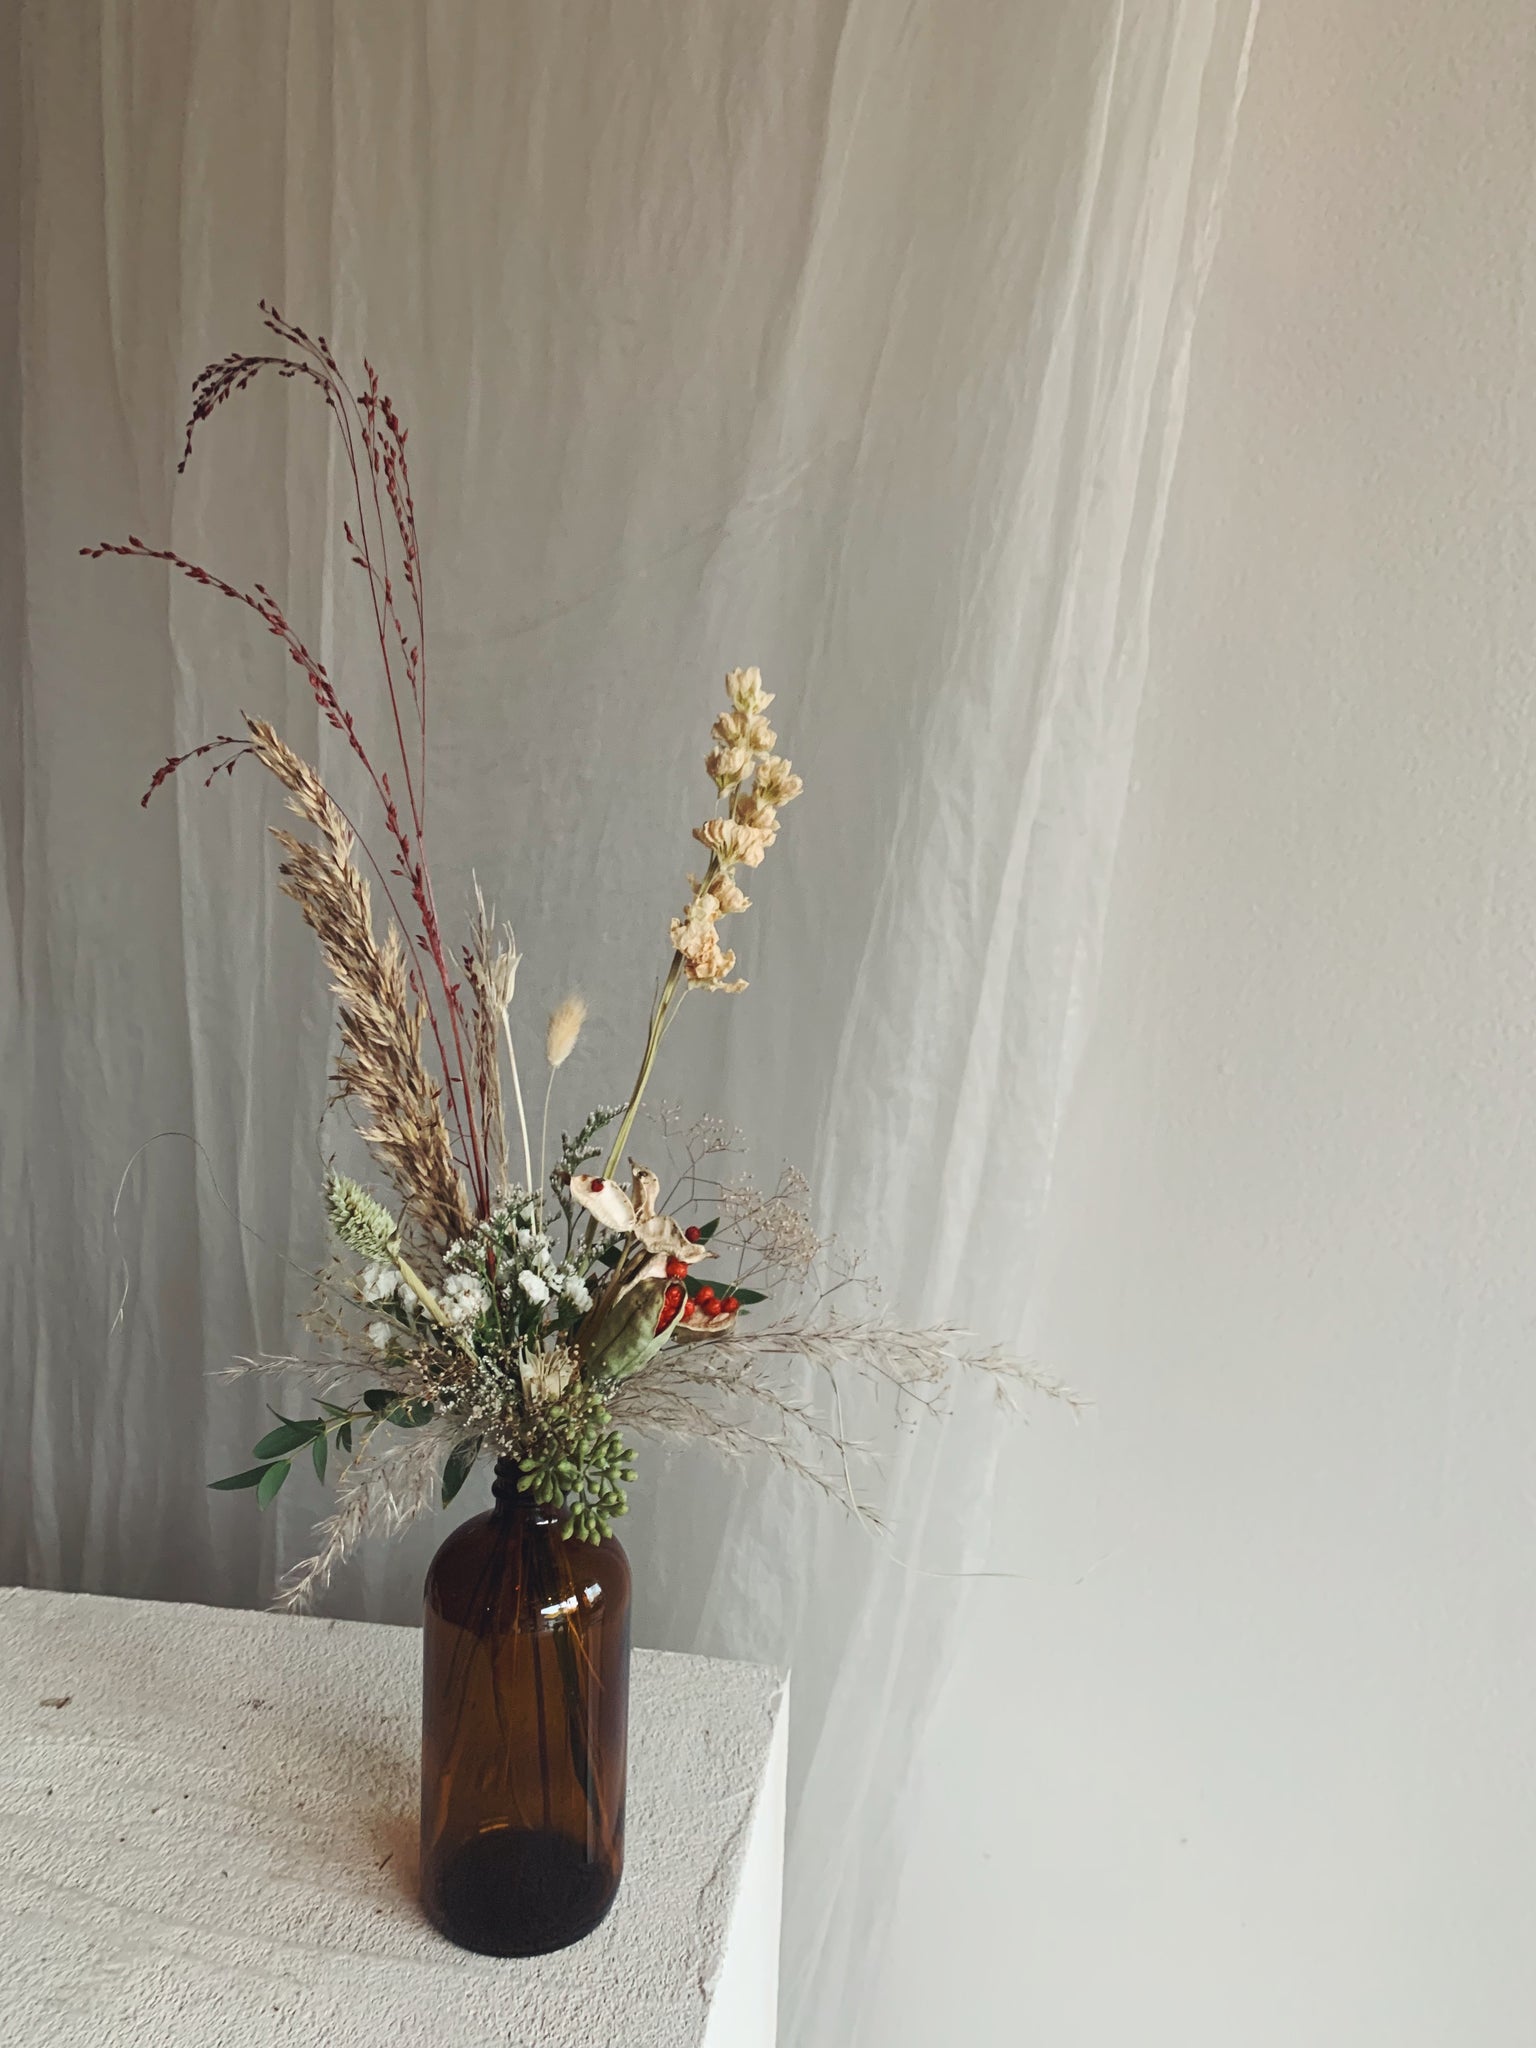 Flower Delivery Vancouver-The Dried Bottle Arrangement-Dried Flower Arrangements-Florist-The Wild Bunch Flower Shop